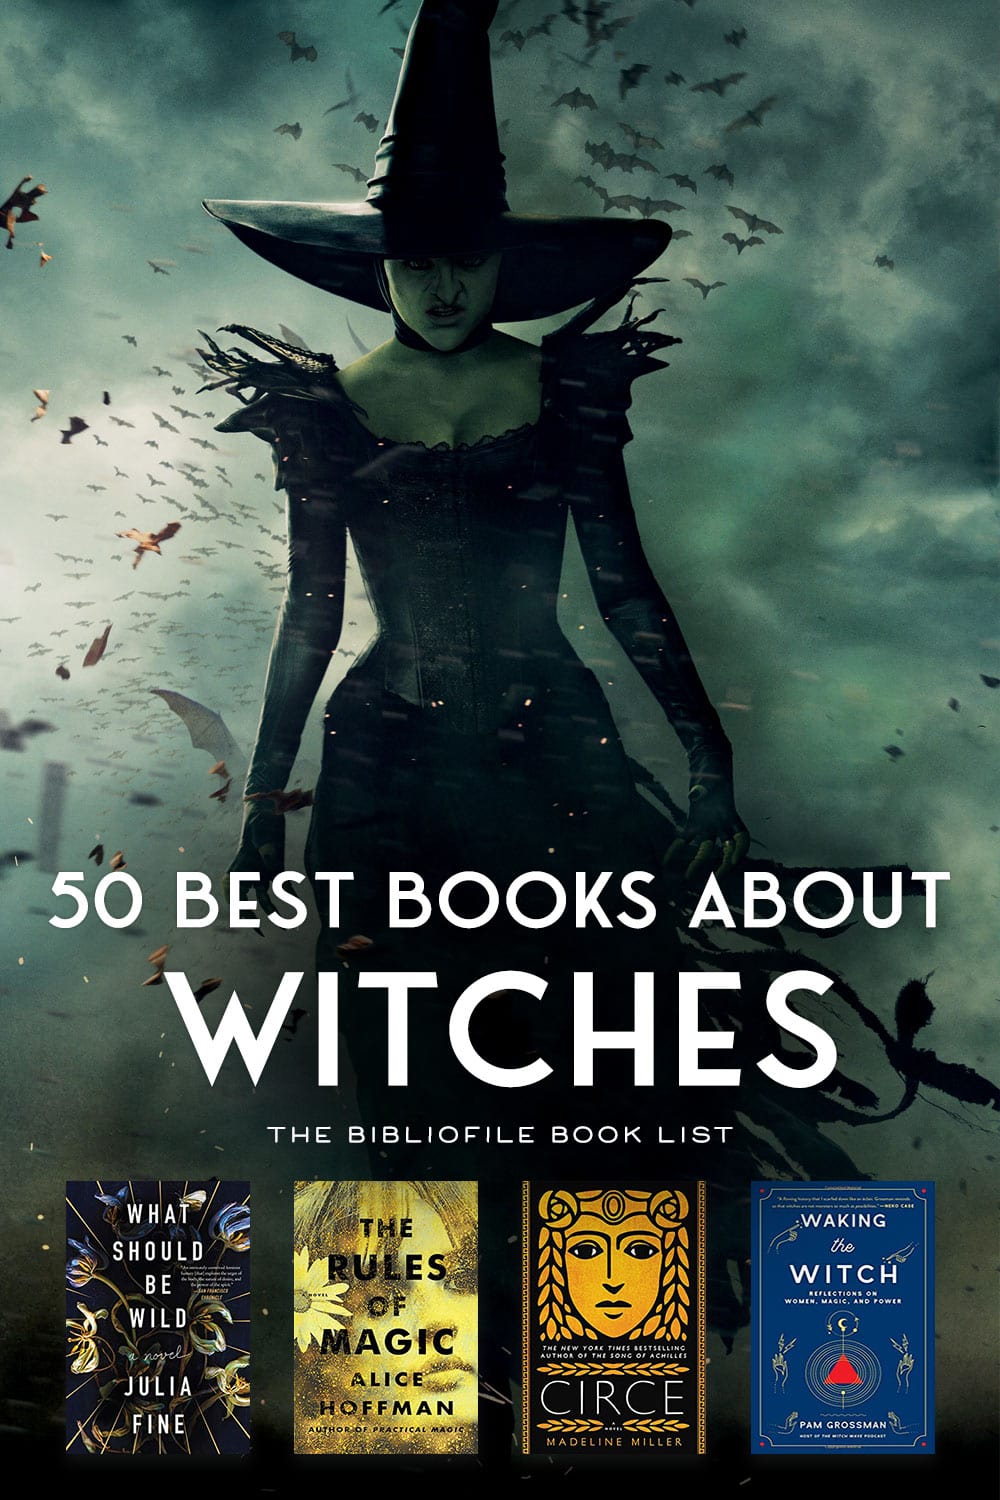 Best Witch Books Goodreads Witches Books 530 Books — 971 Voters Villacosmeticavipclub